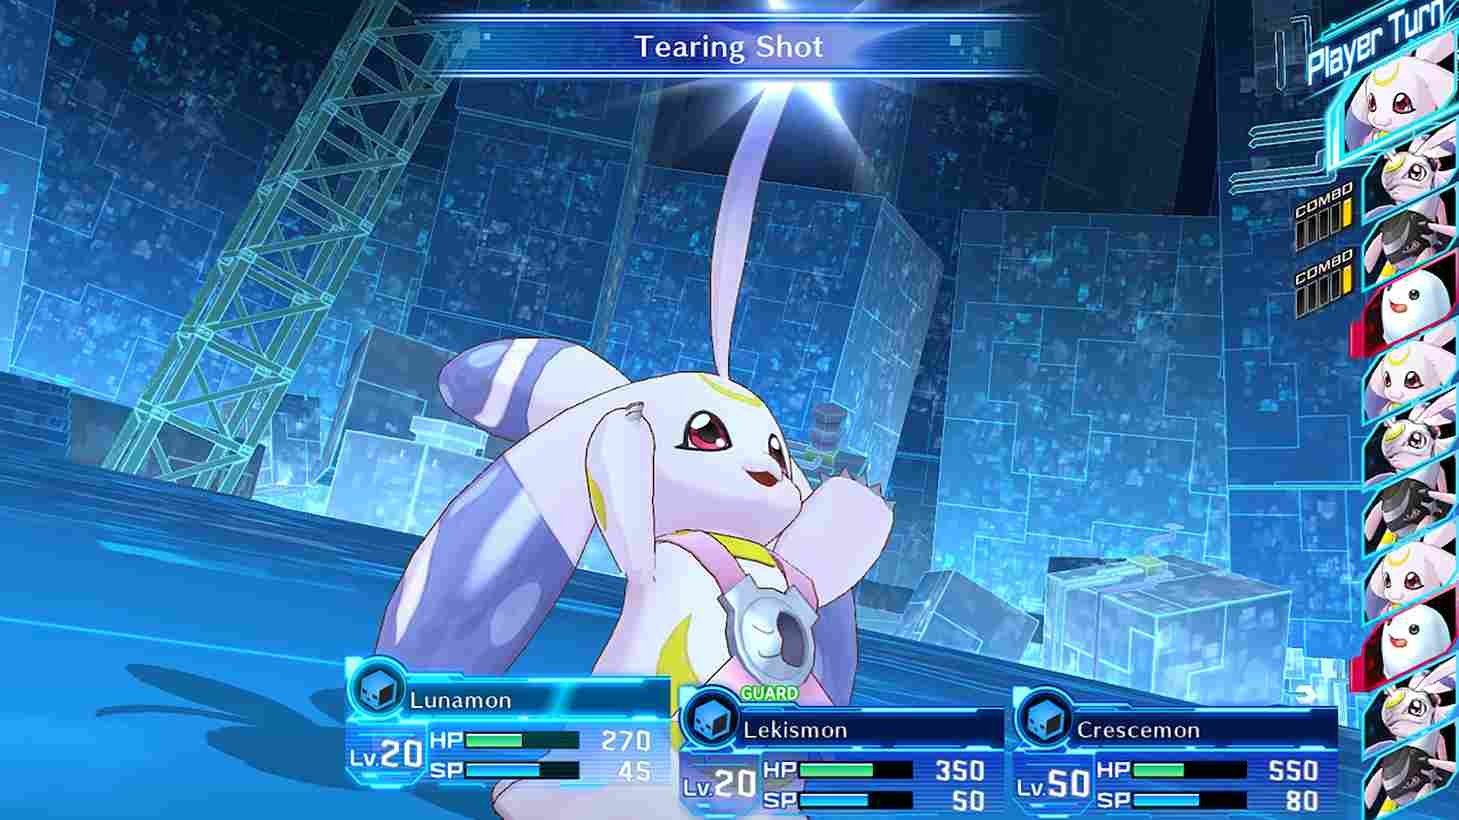 Digimon Story Cyber Sleuth Steam Deck black screen issue How to fix it